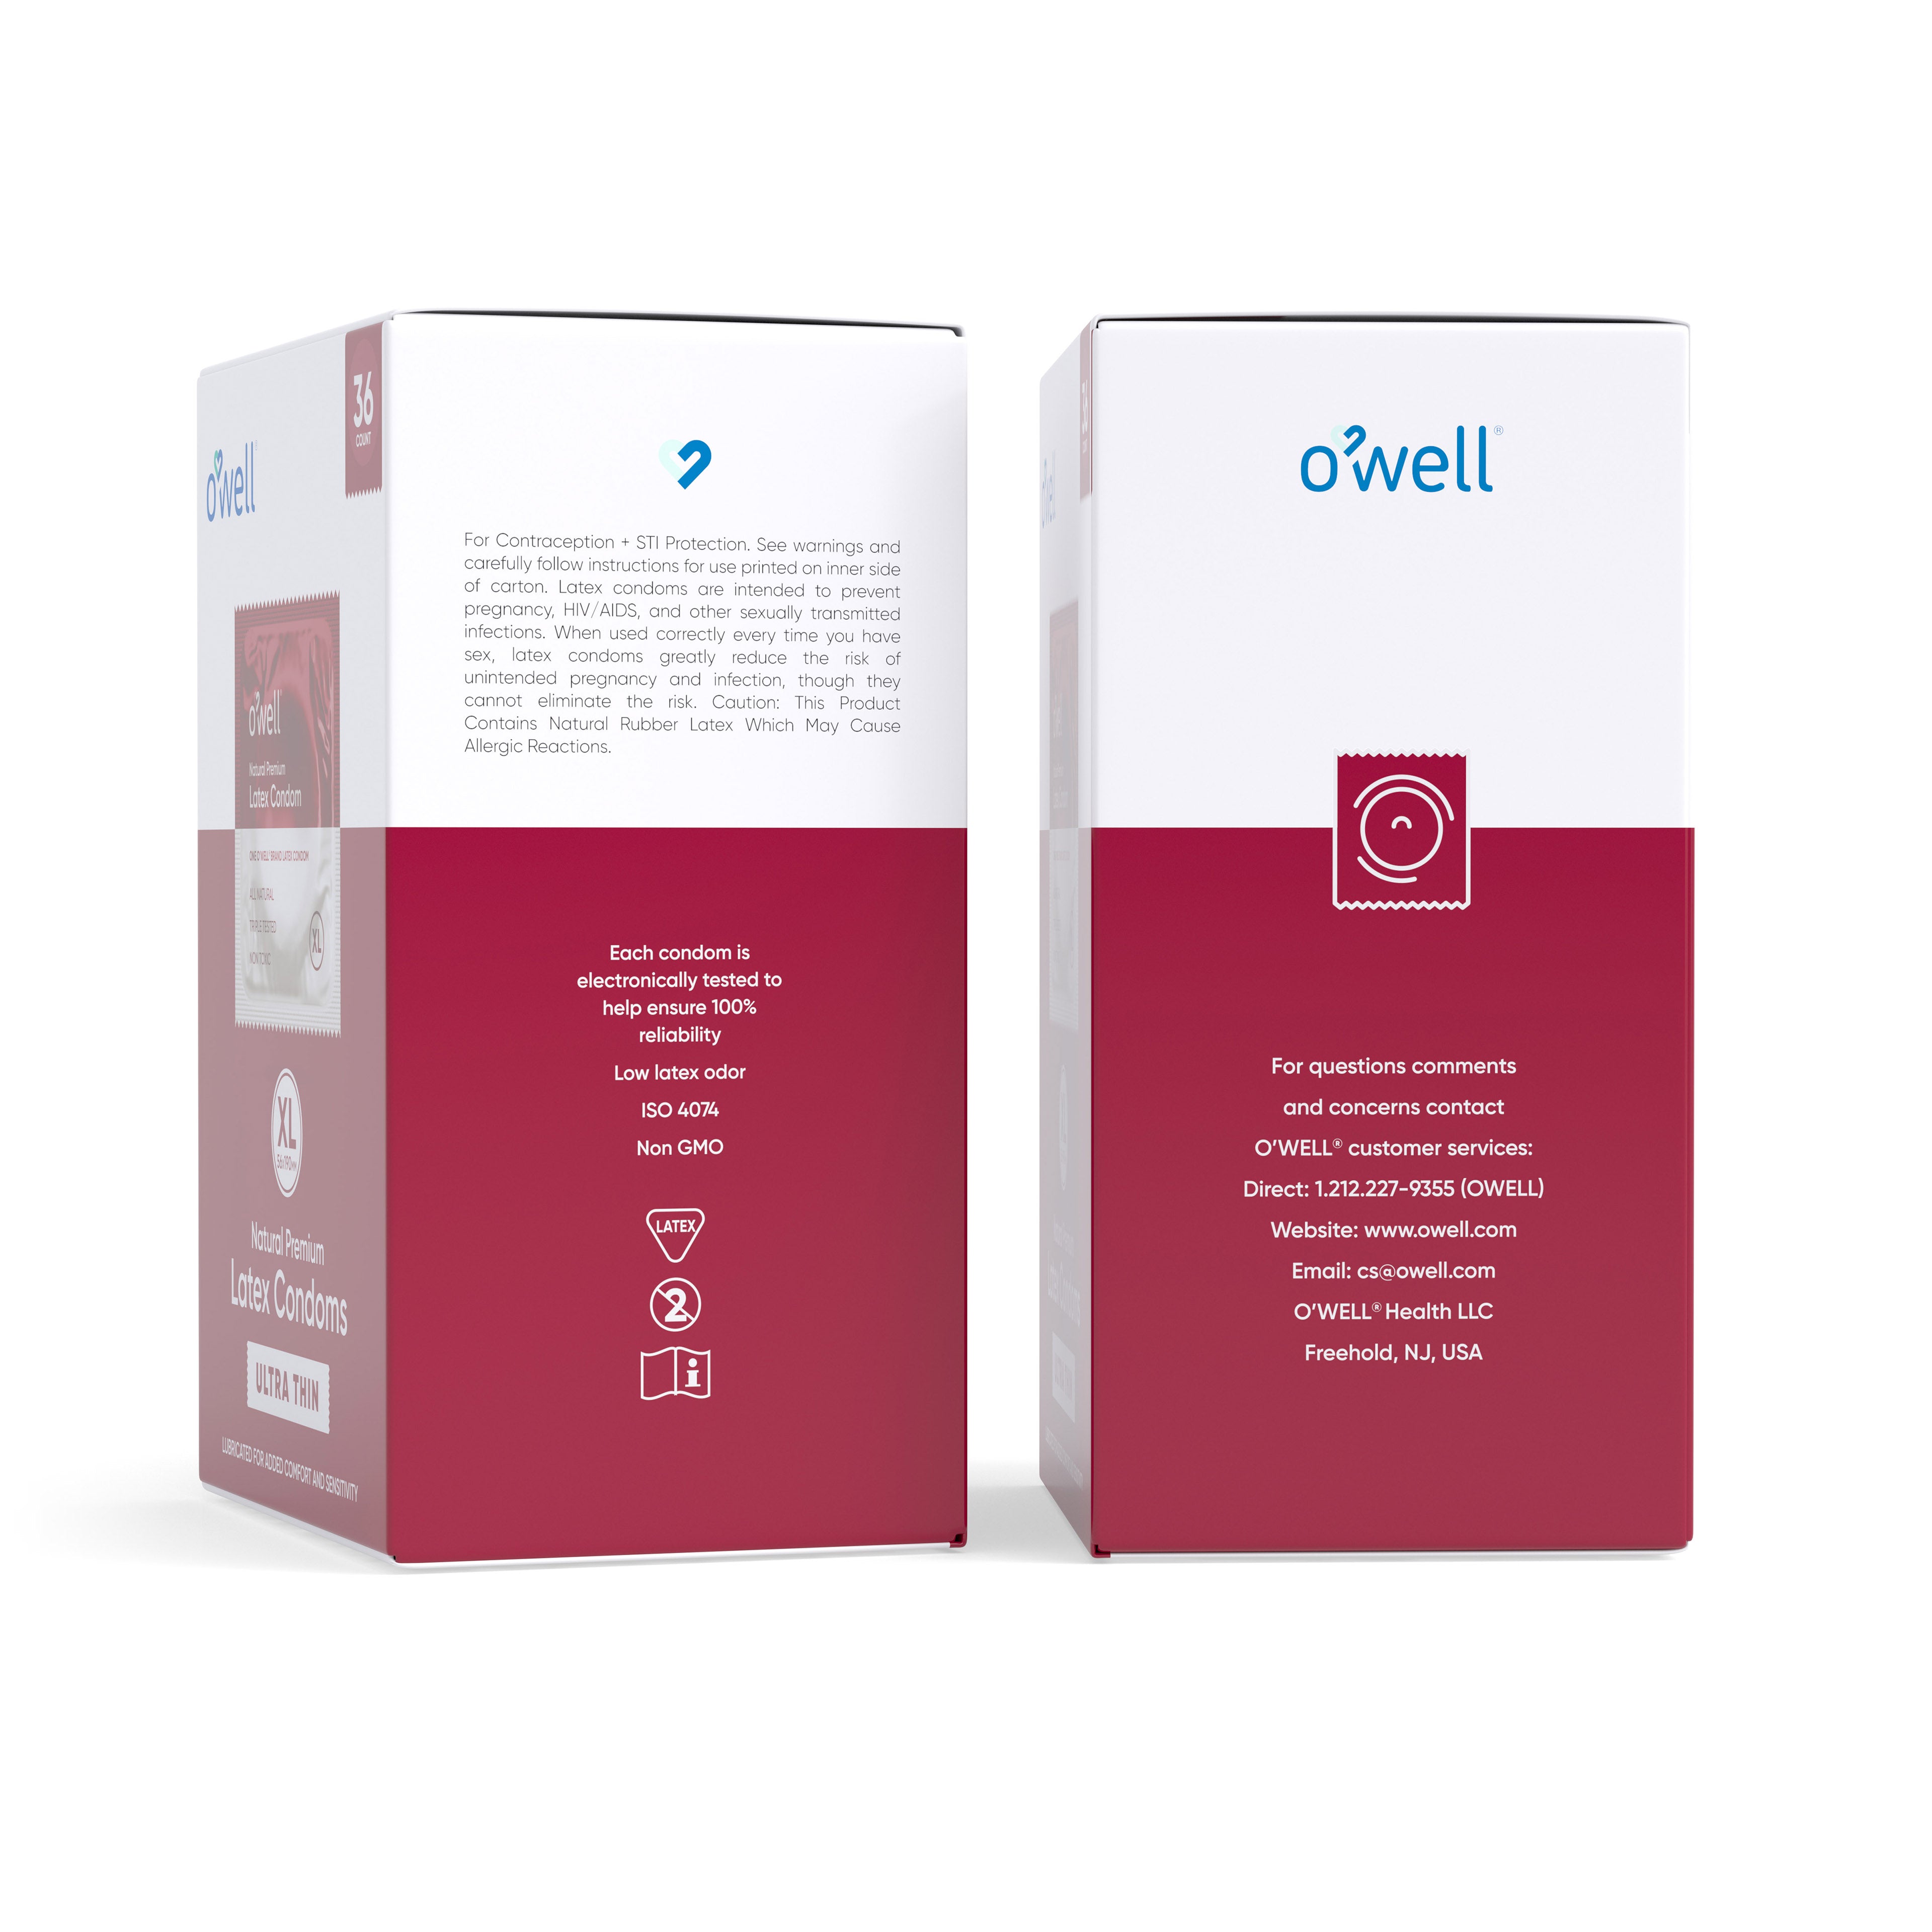 O’WELL Premium All-Natural Latex Condoms, 36 Count (Ultra-Thin)